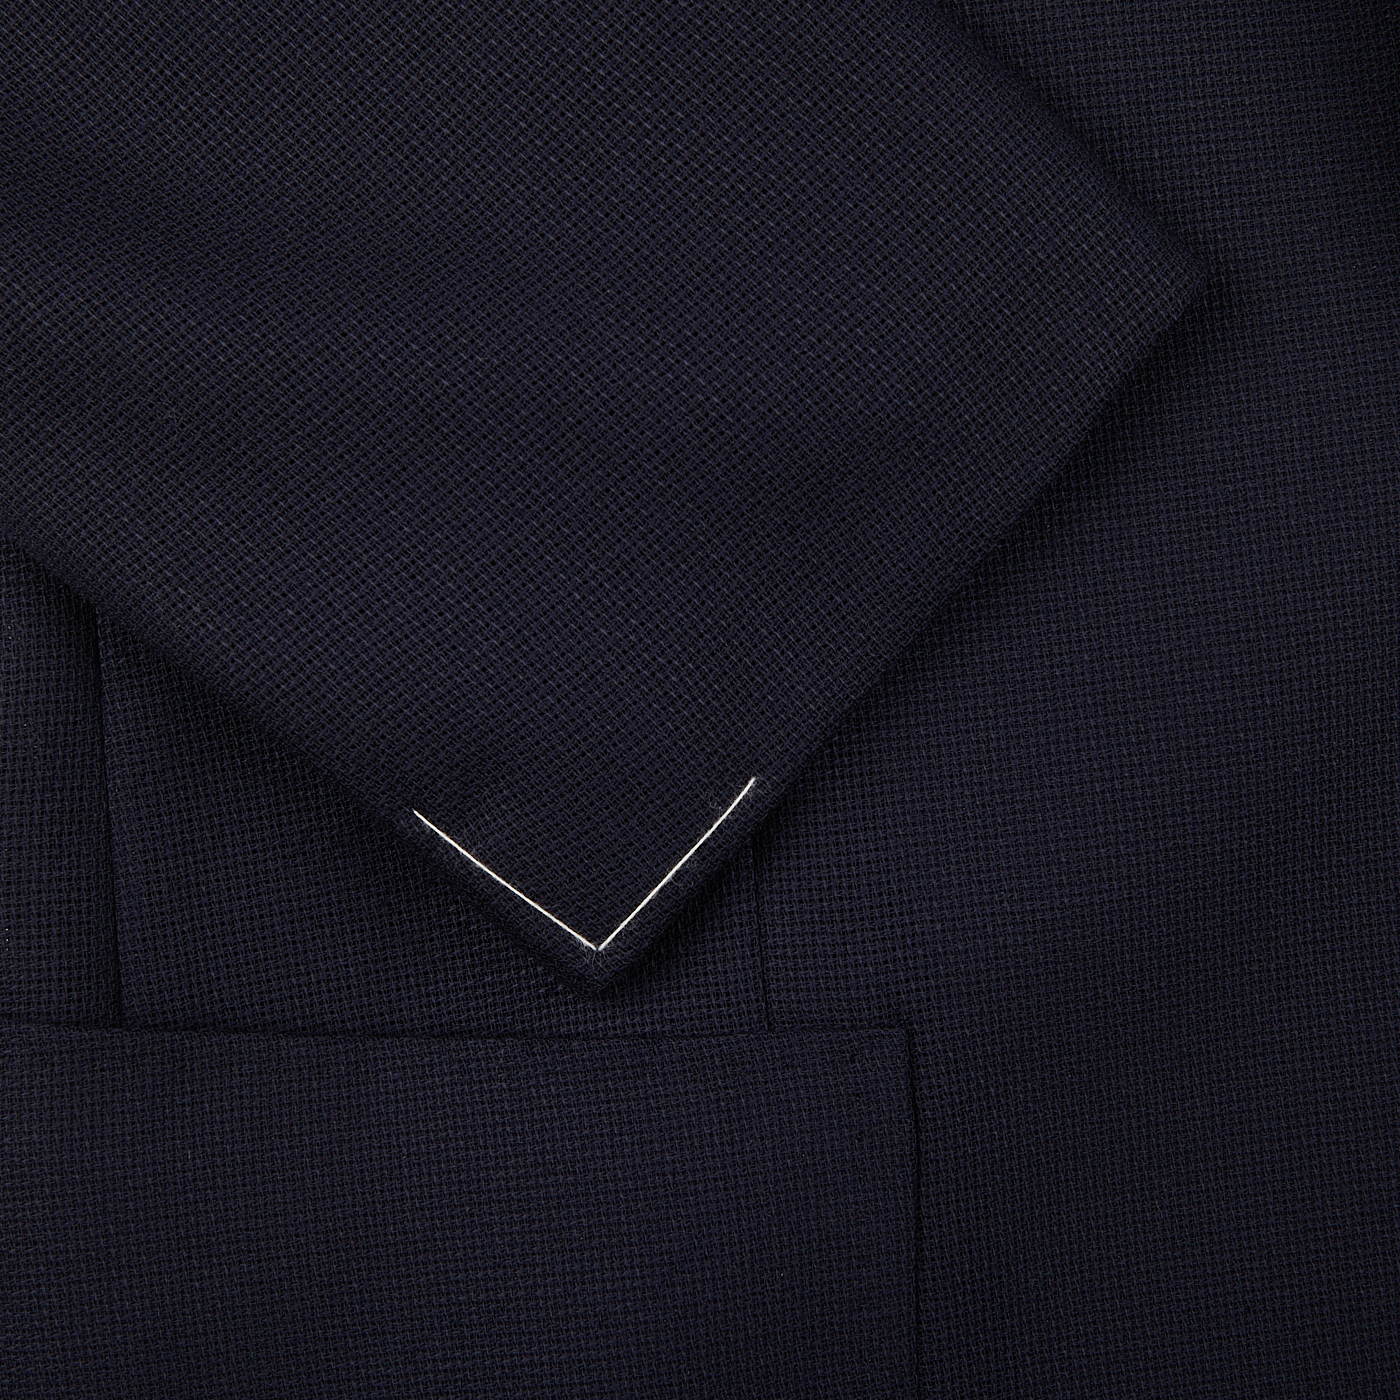 Close-up view of a Navy Blue Wool Balloon Travel Blazer from Ring Jacket, showing detailed weave pattern and a pointed lapel.